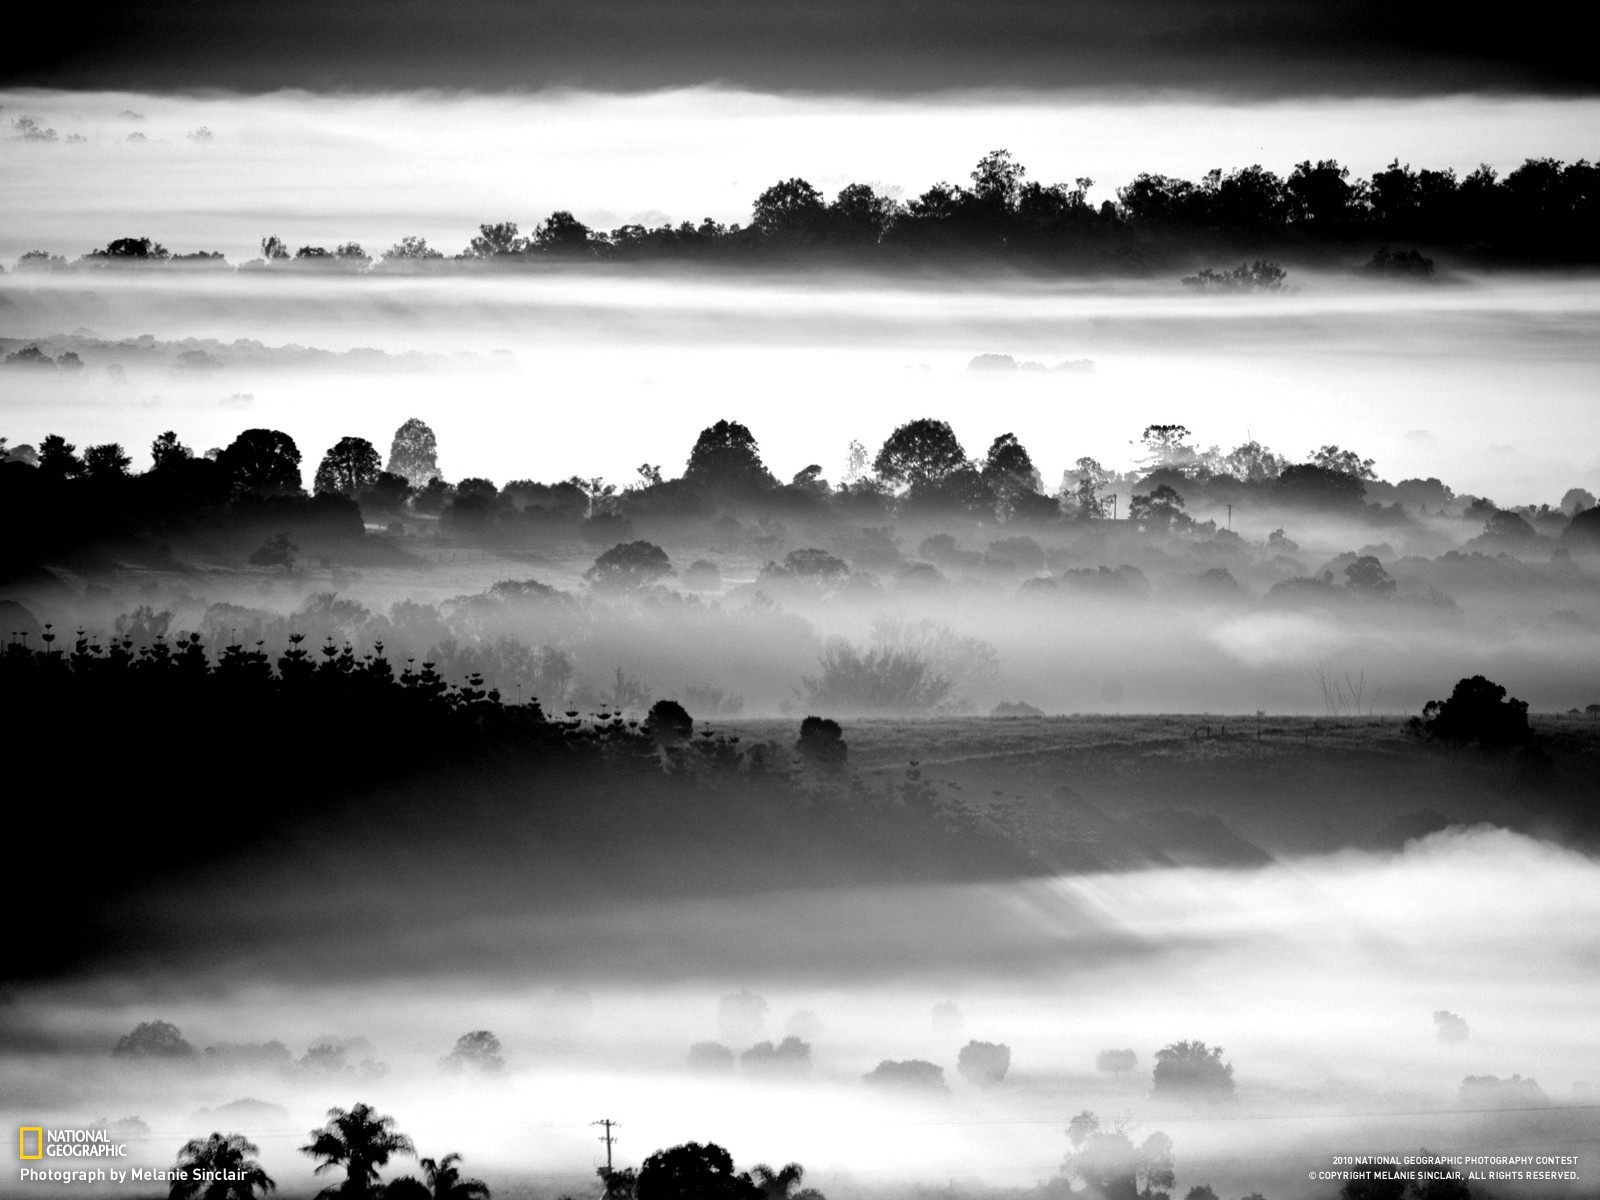 General 1600x1200 landscape mist nature monochrome National Geographic 2010 (Year)